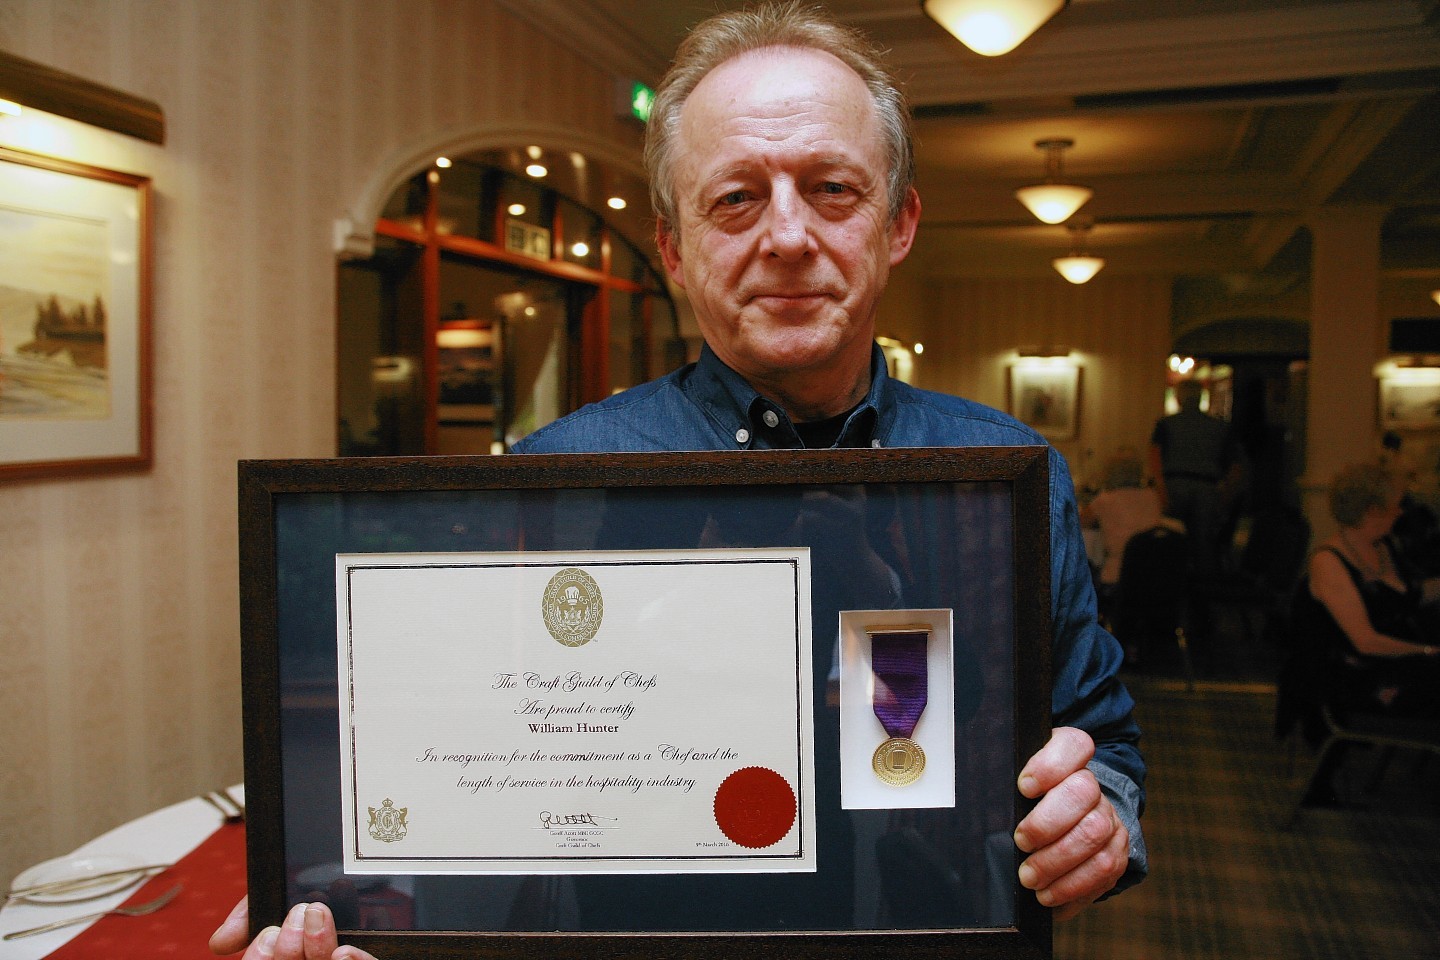 William Hunter with his Gold Medal and certificate